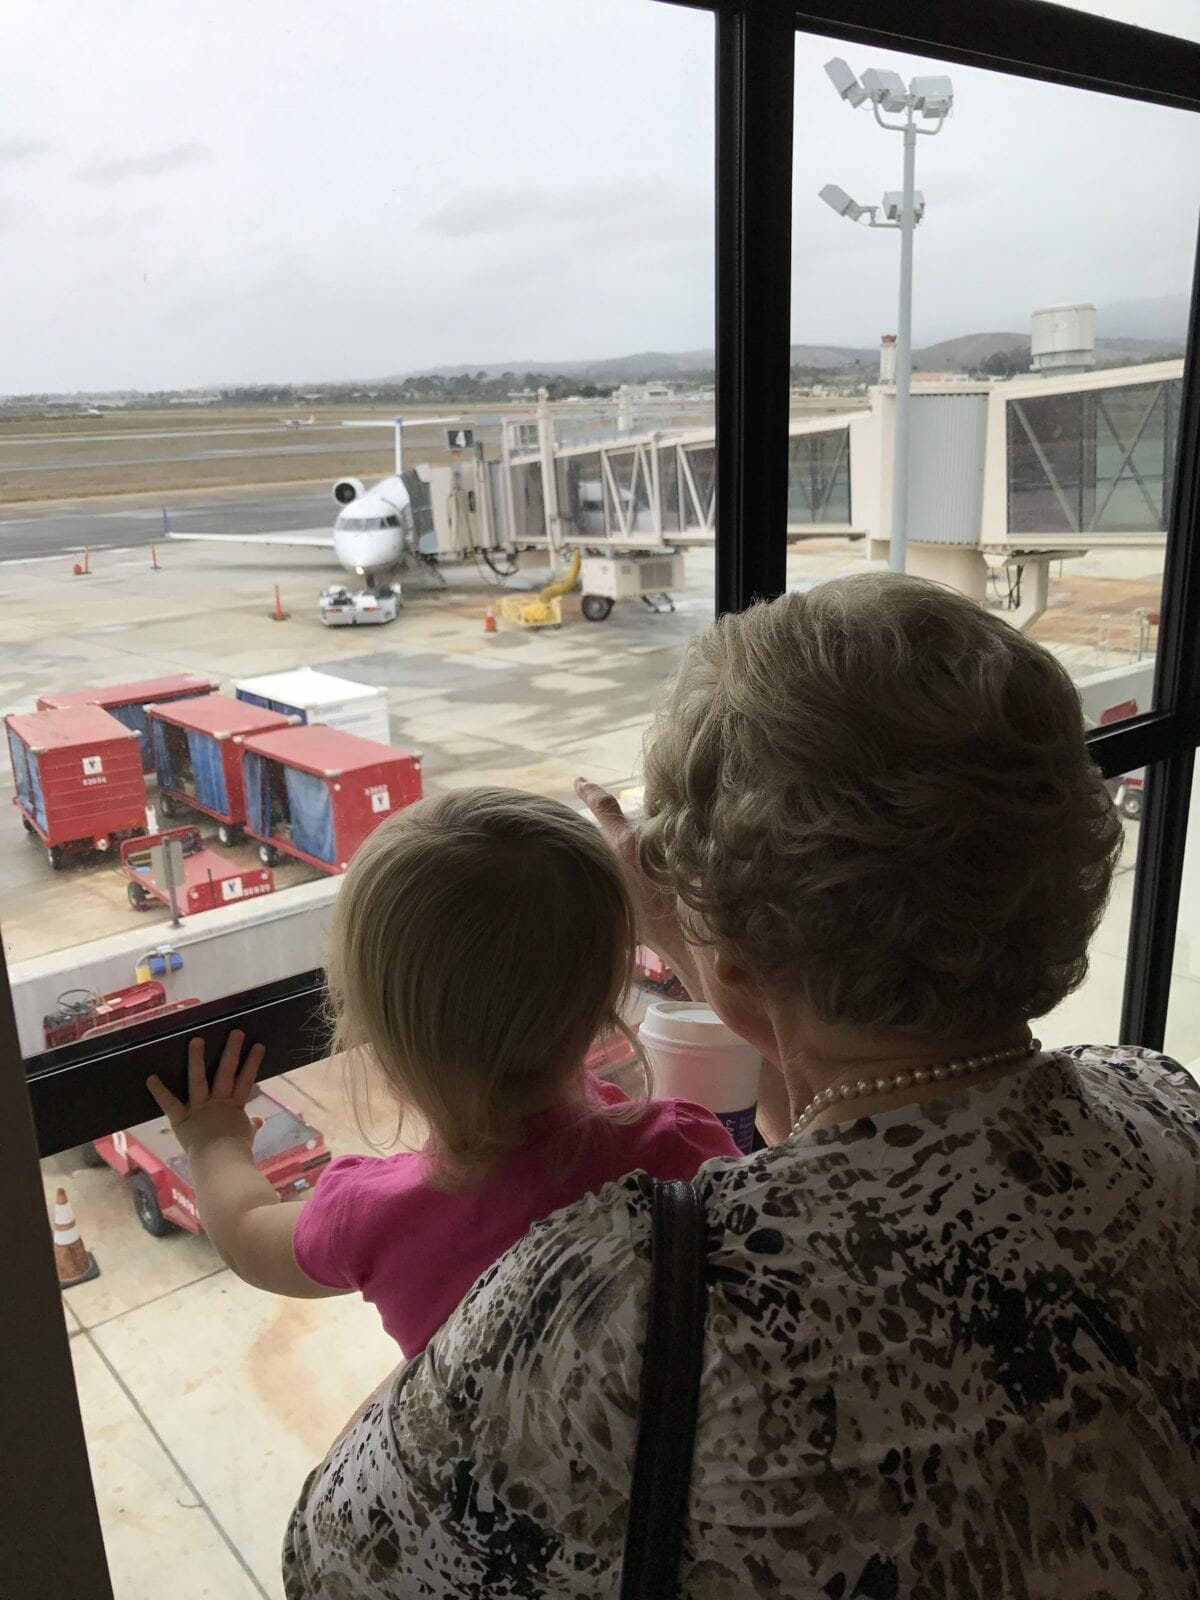 Grandma holding child up to window in airport image.